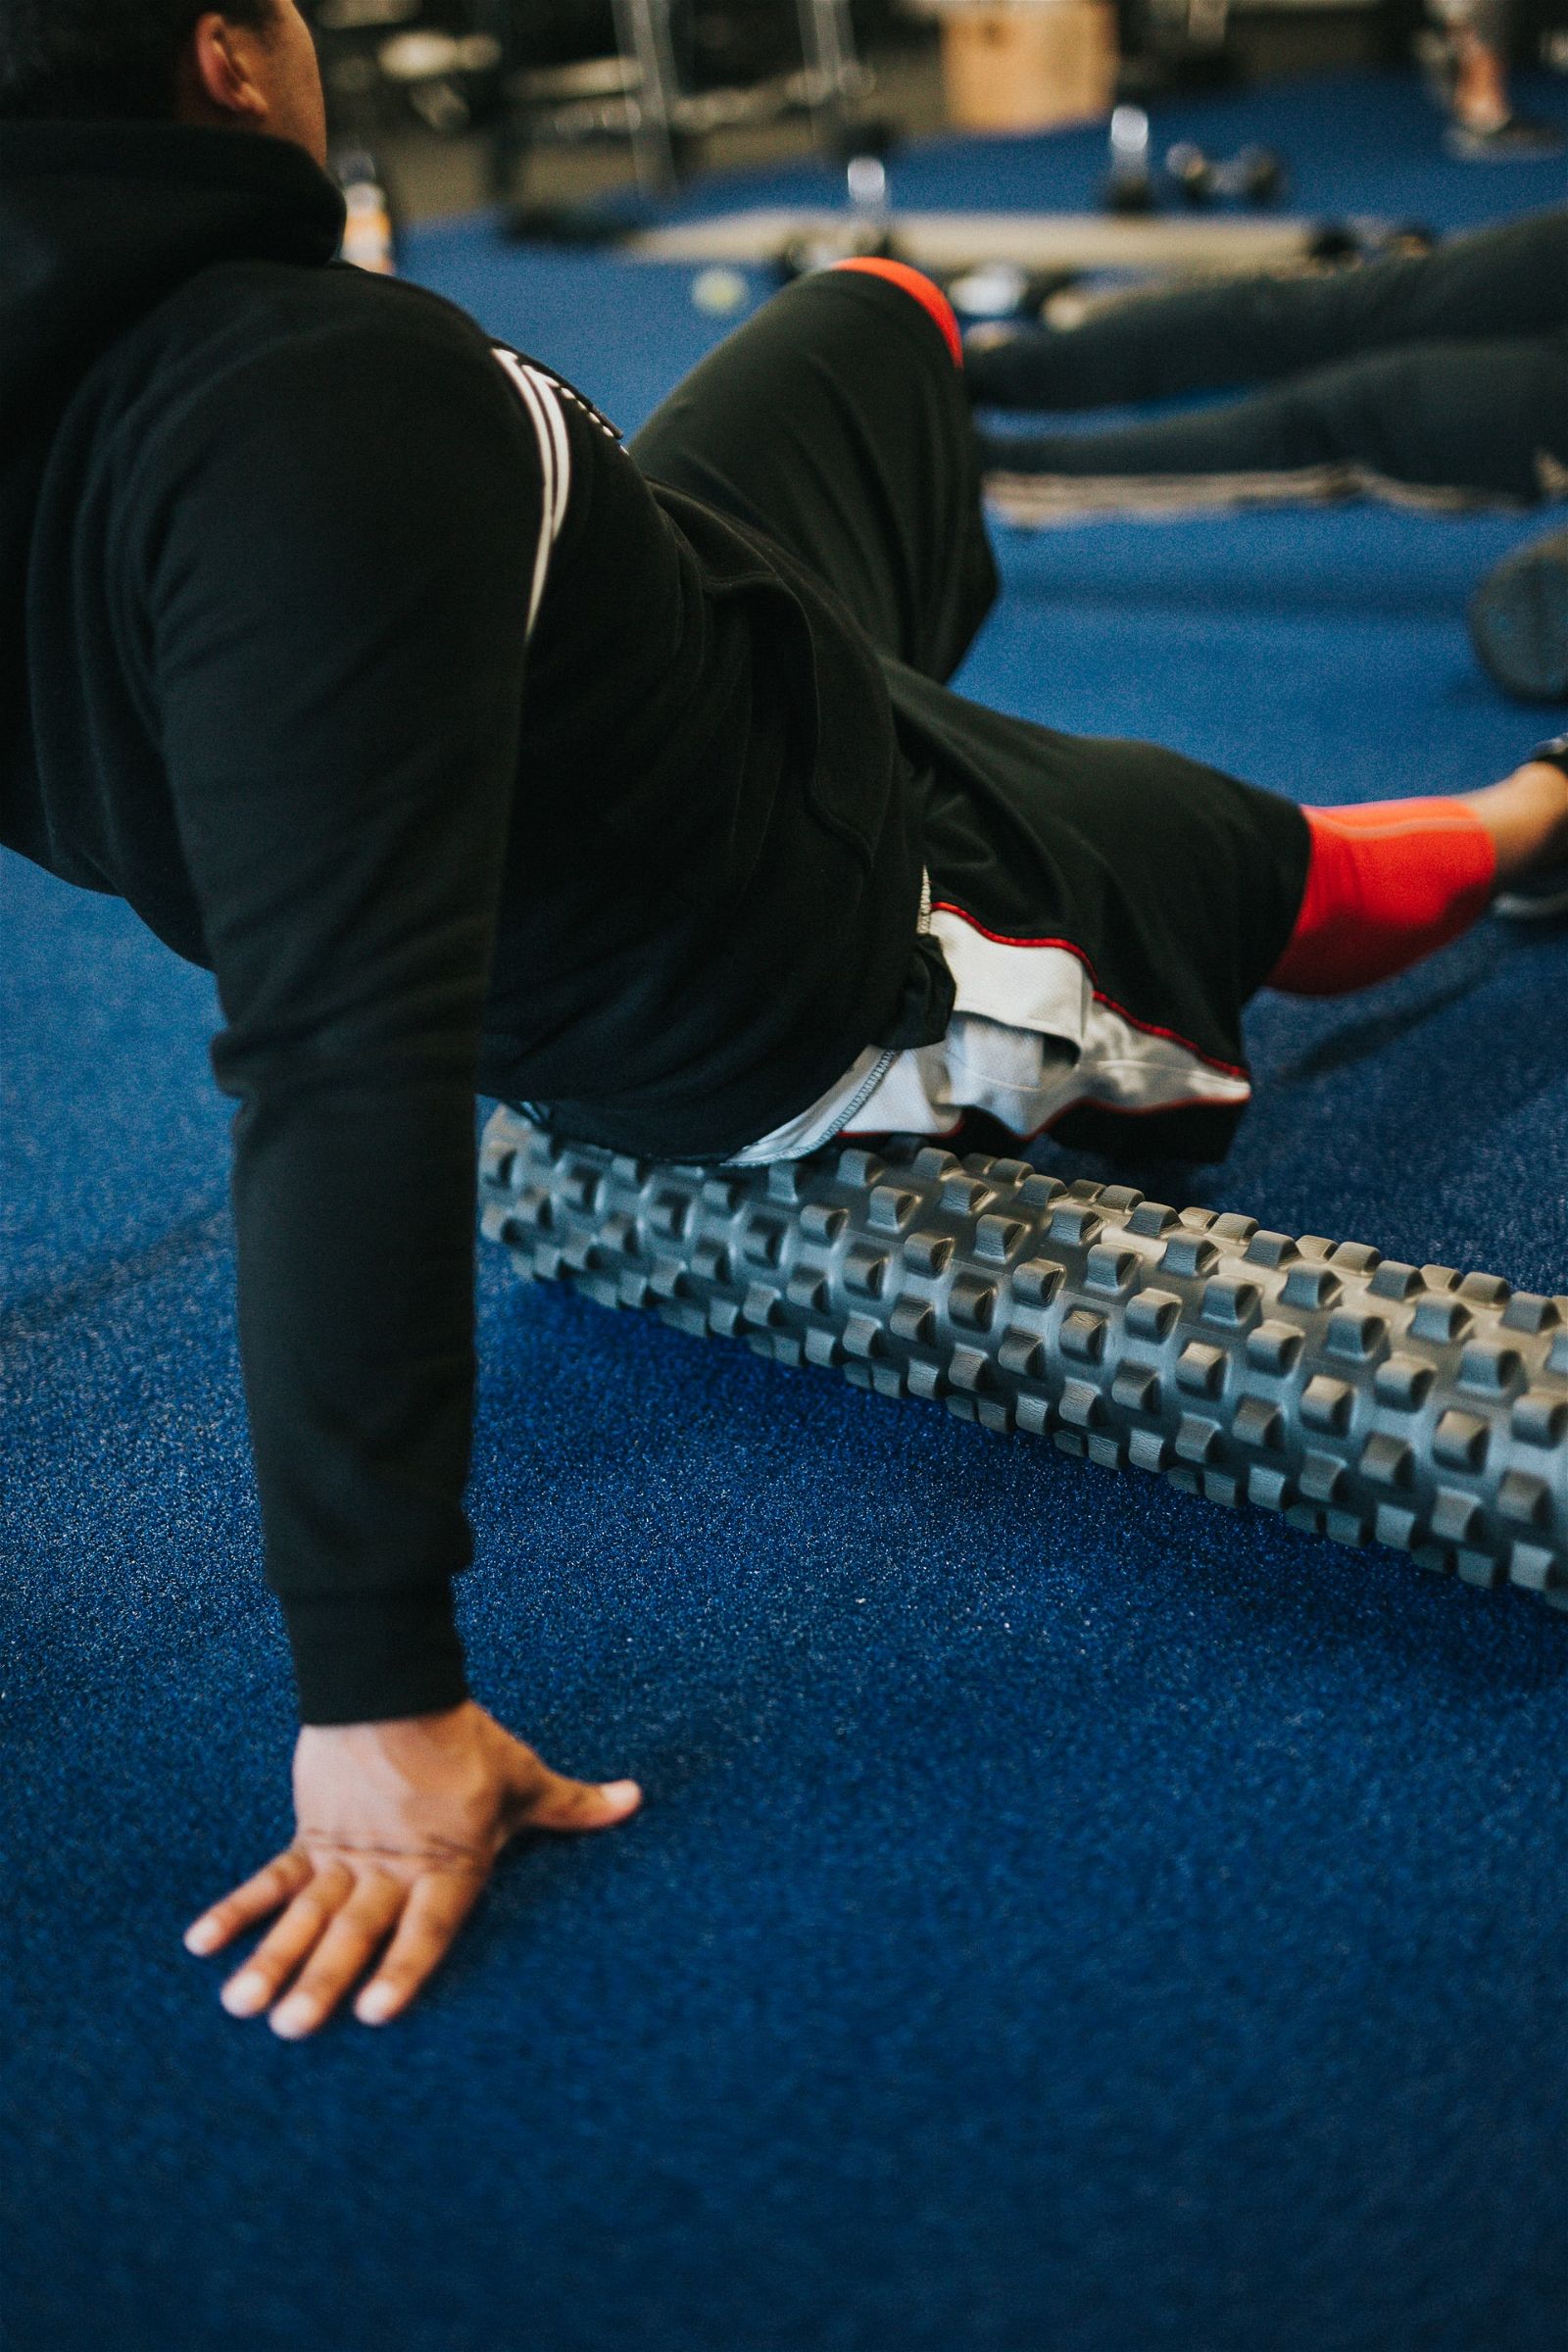 Foam Rolling 101: Everything You Need to Know to Get Rolling - Anytime  Fitness